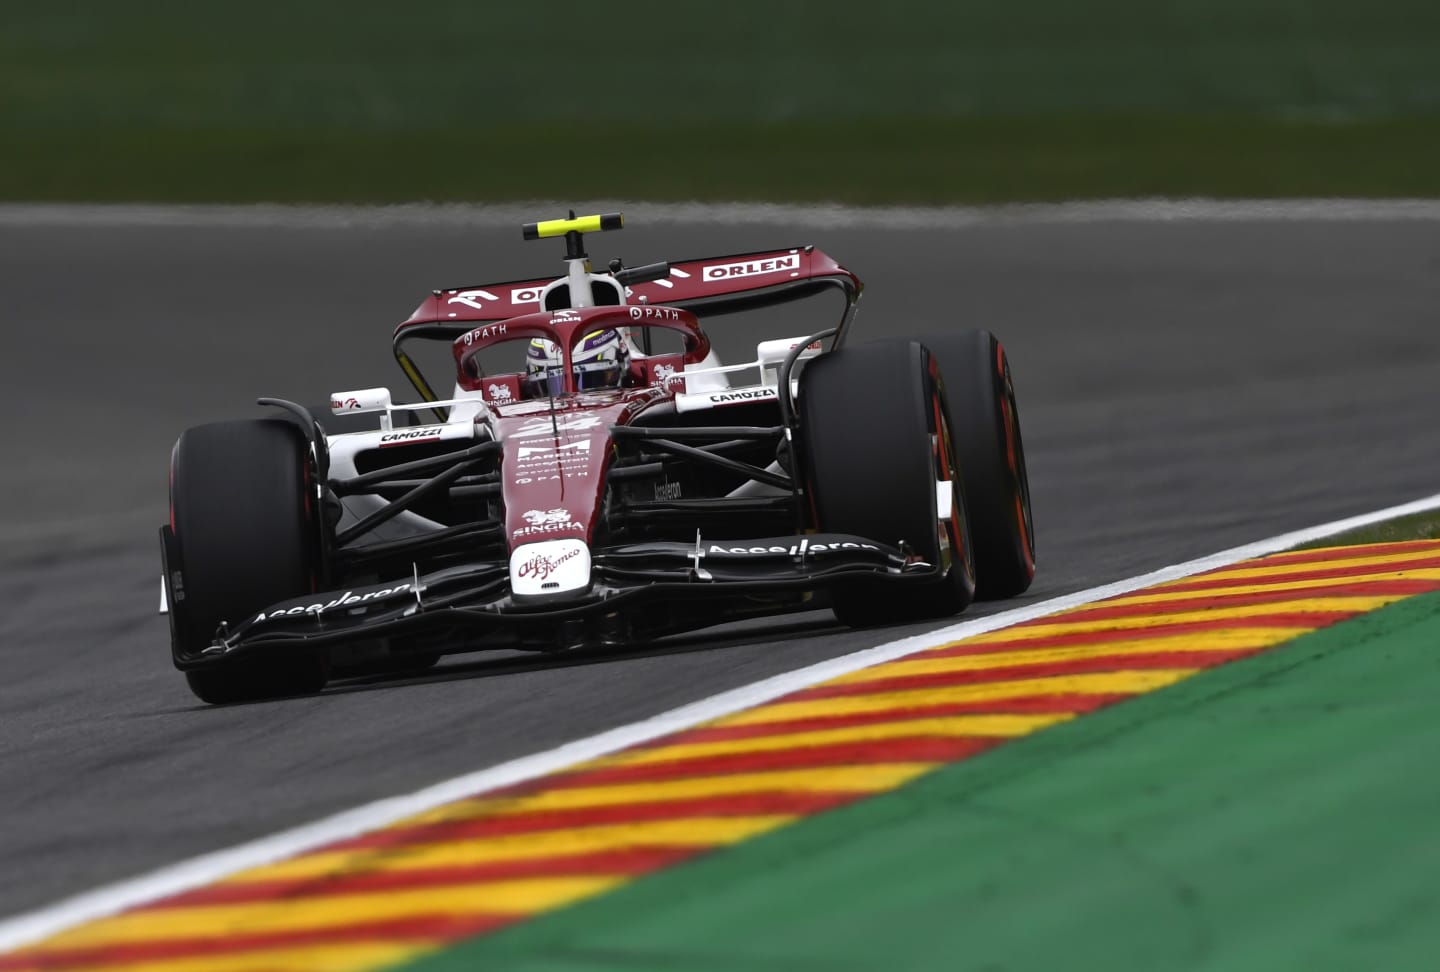 SPA, BELGIUM - AUGUST 27: Zhou Guanyu of China driving the (24) Alfa Romeo F1 C42 Ferrari on track during qualifying ahead of the F1 Grand Prix of Belgium at Circuit de Spa-Francorchamps on August 27, 2022 in Spa, Belgium. (Photo by Rudy Carezzevoli/Getty Images)